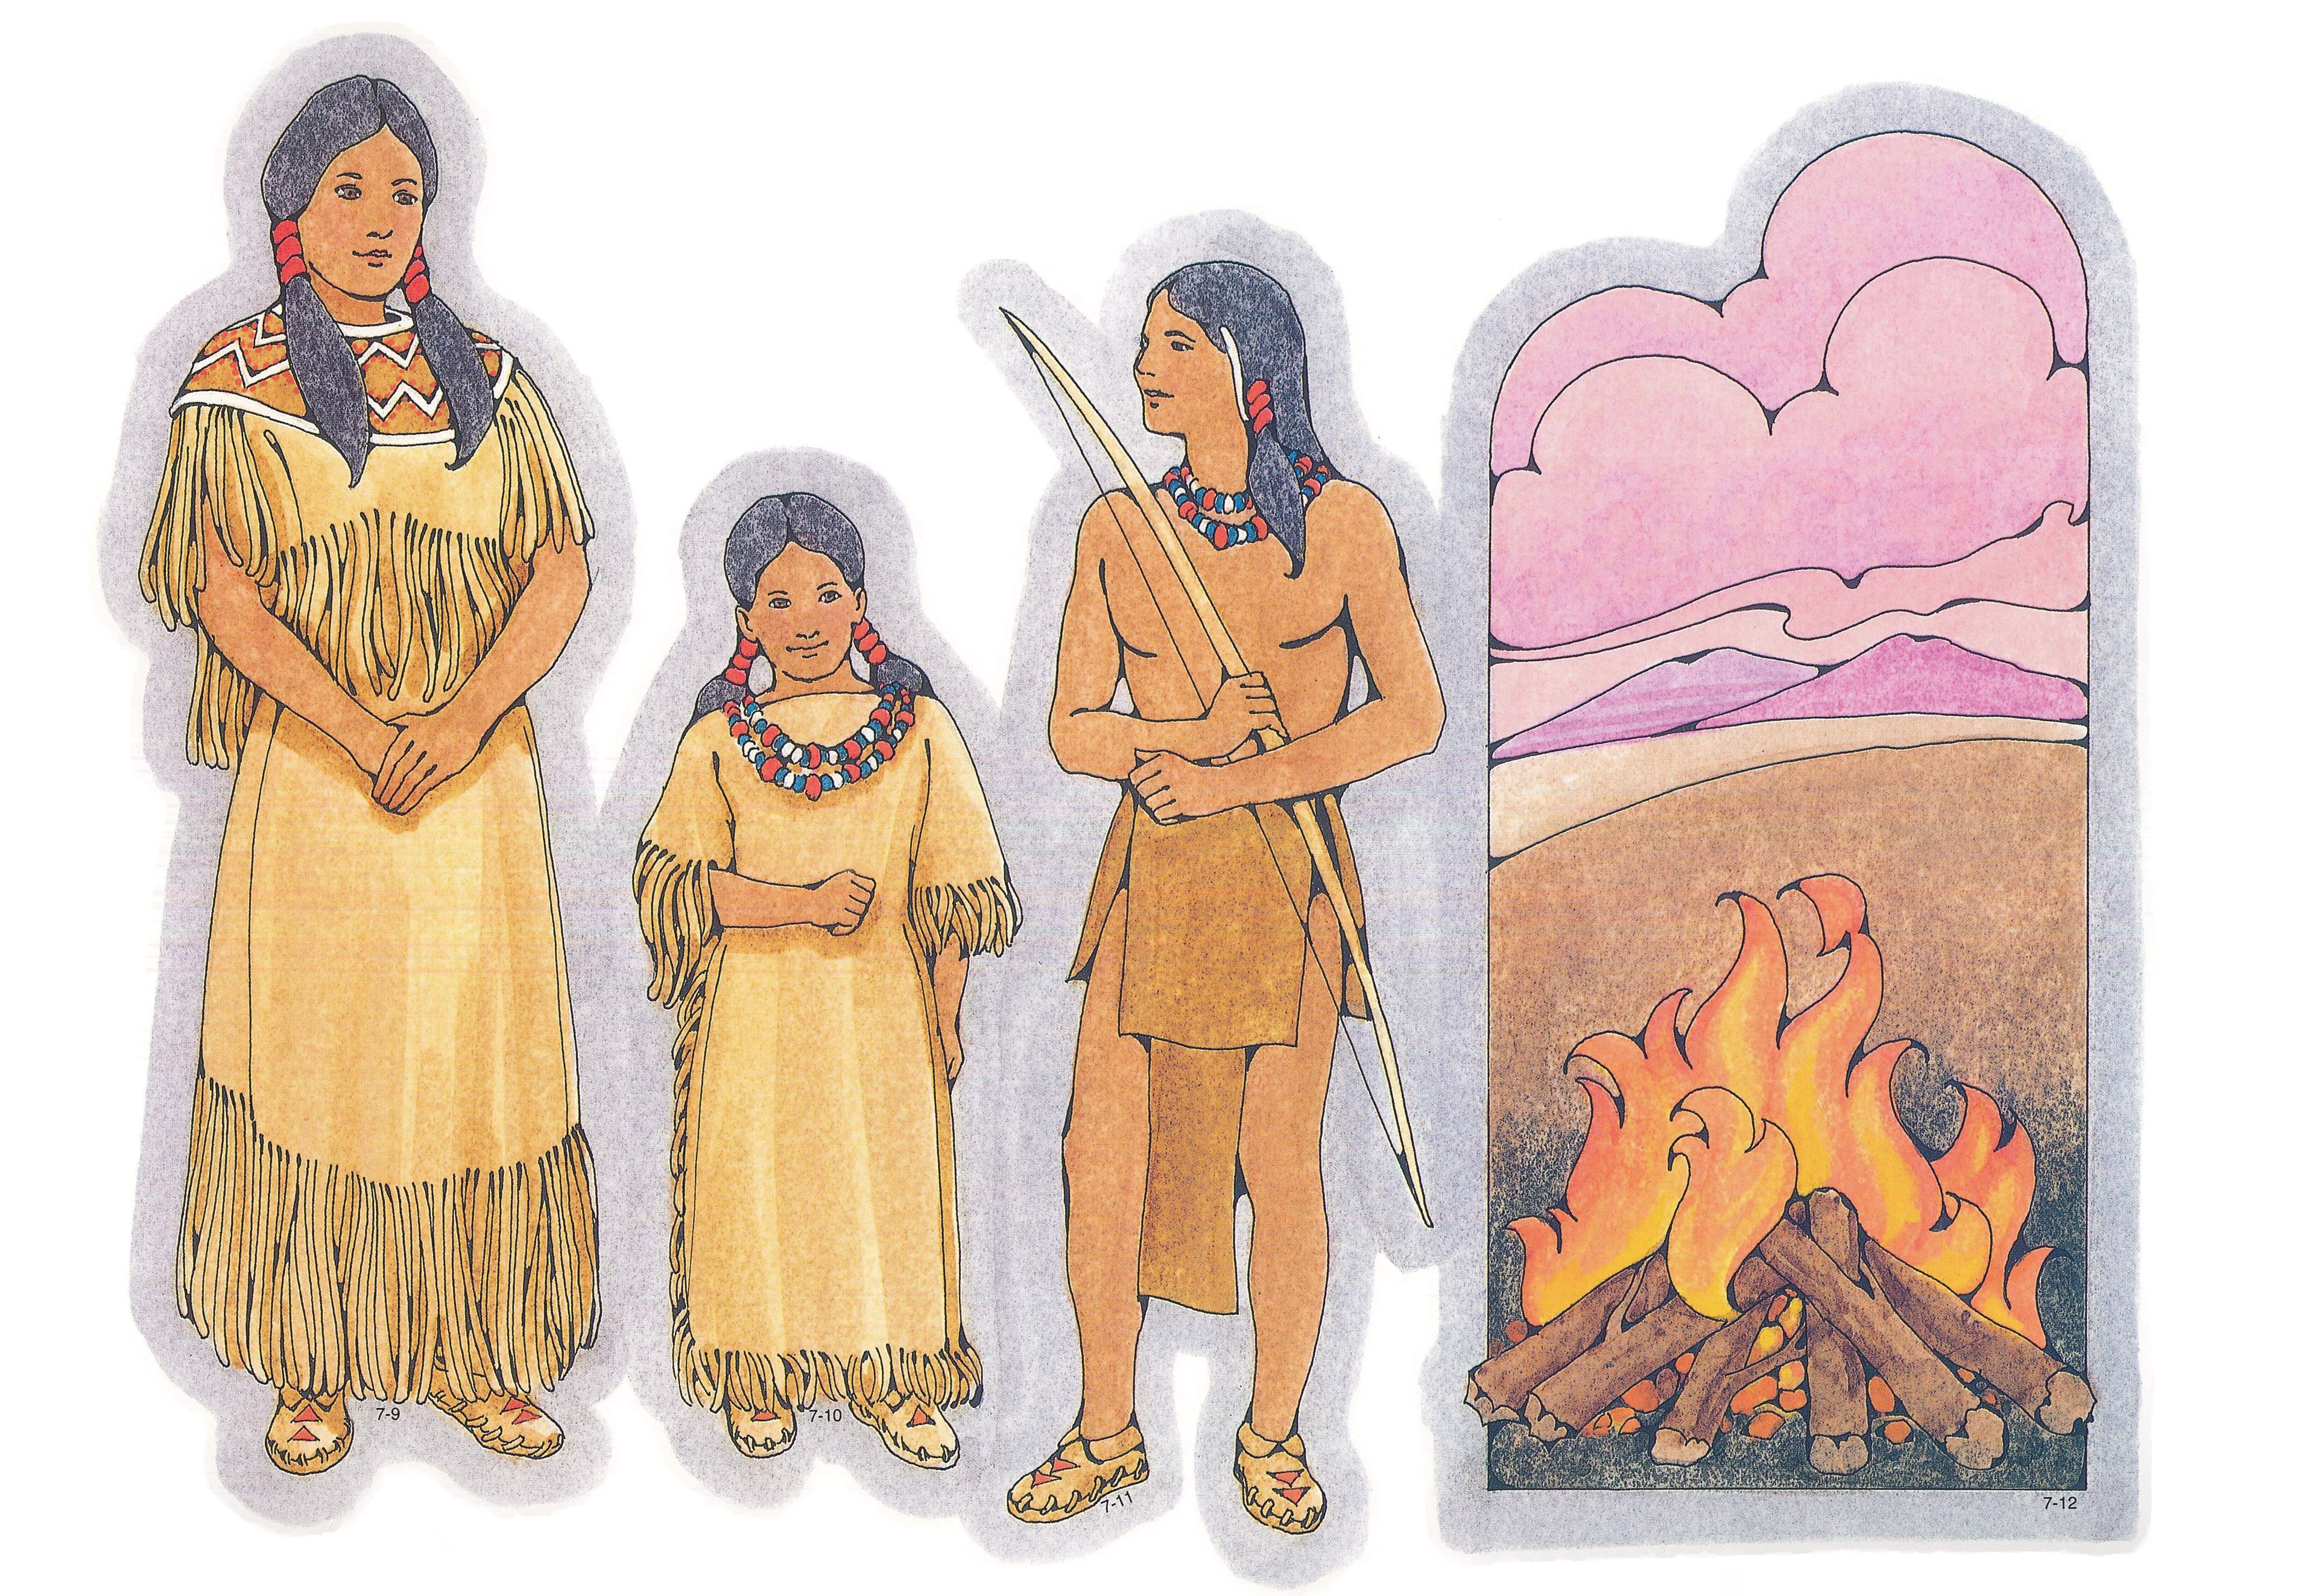 Primary Visual Aids: Cutouts 7-9, Young Woman; 7-10, Young Girl; 7-11, Young Man with Bow and Arrow; 7-12, Campfire.